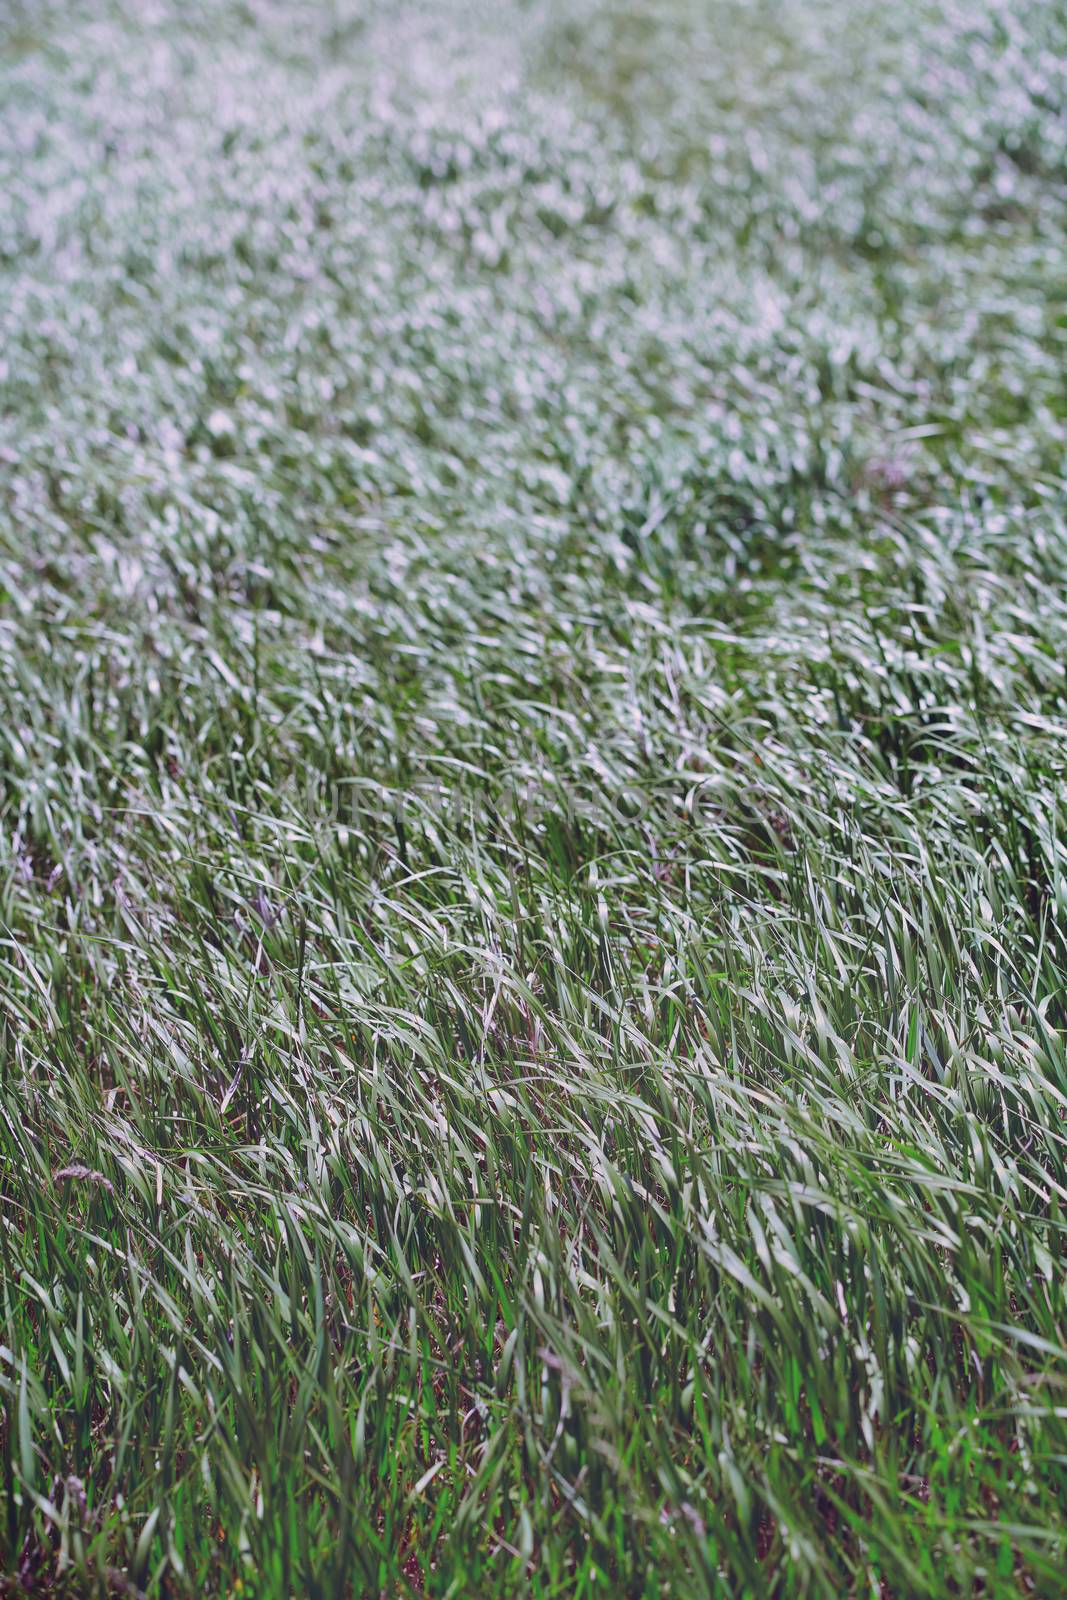 Pattern of the field grass 